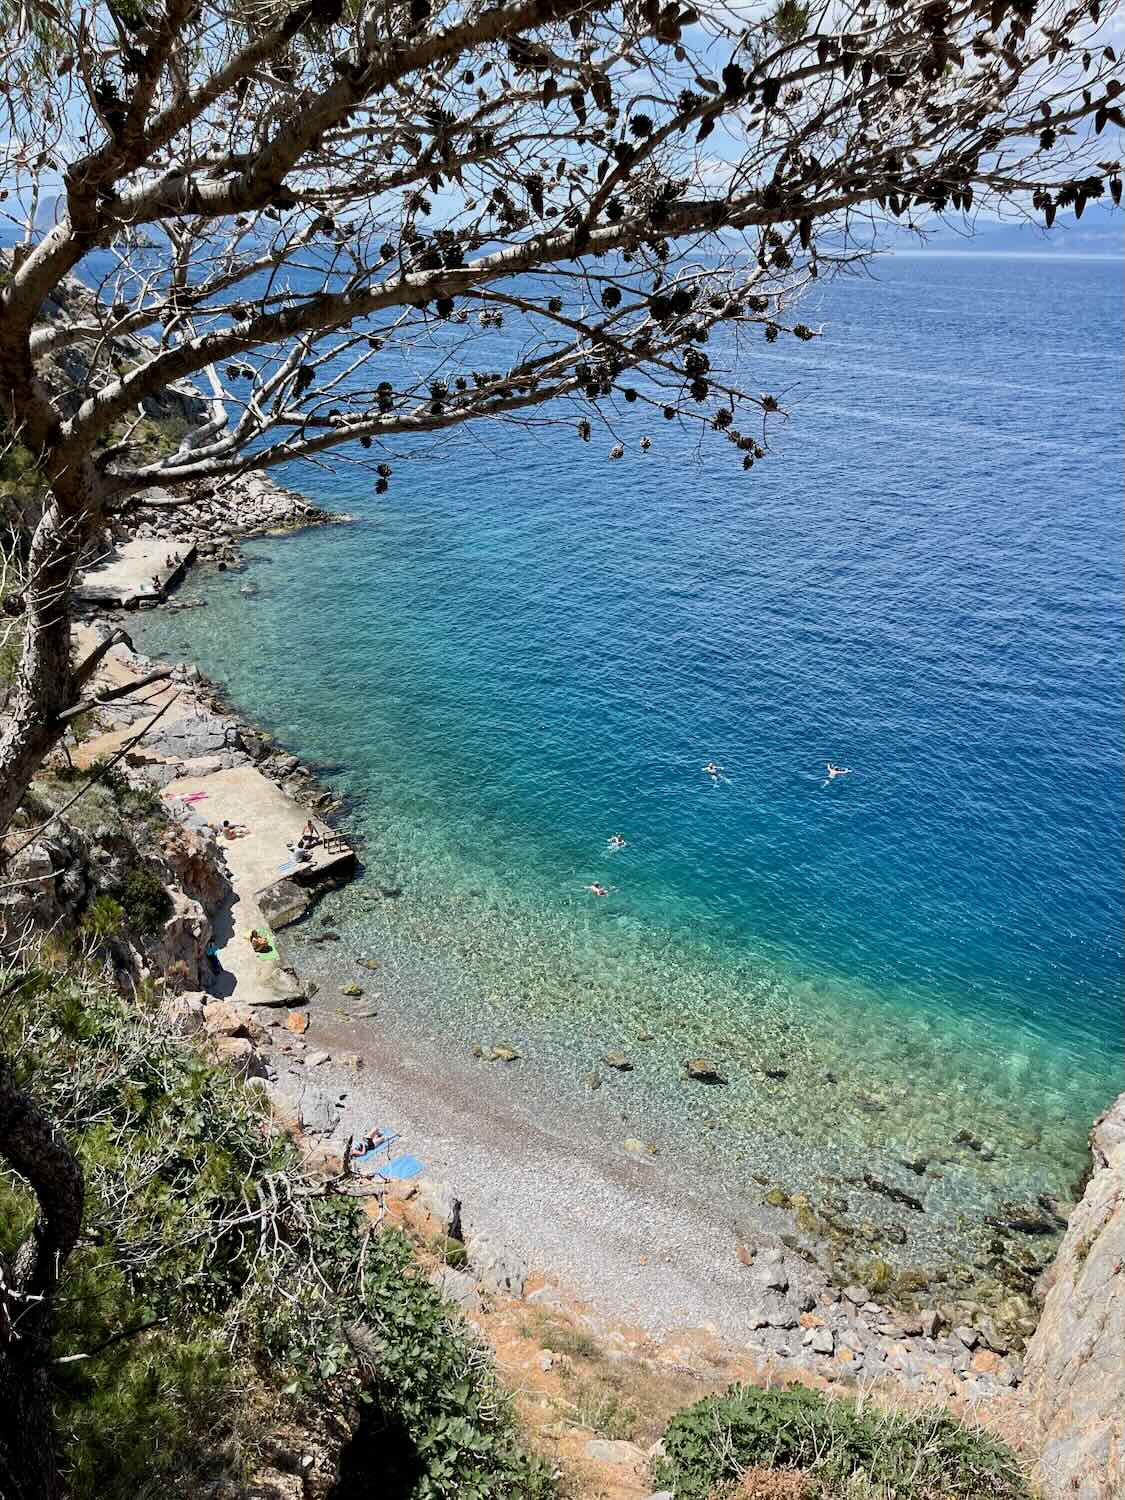 Secluded pebble beach on Hydra with crystalline waters, shaded by a tree, where visitors bask in the Mediterranean sun or swim in the serene sea.